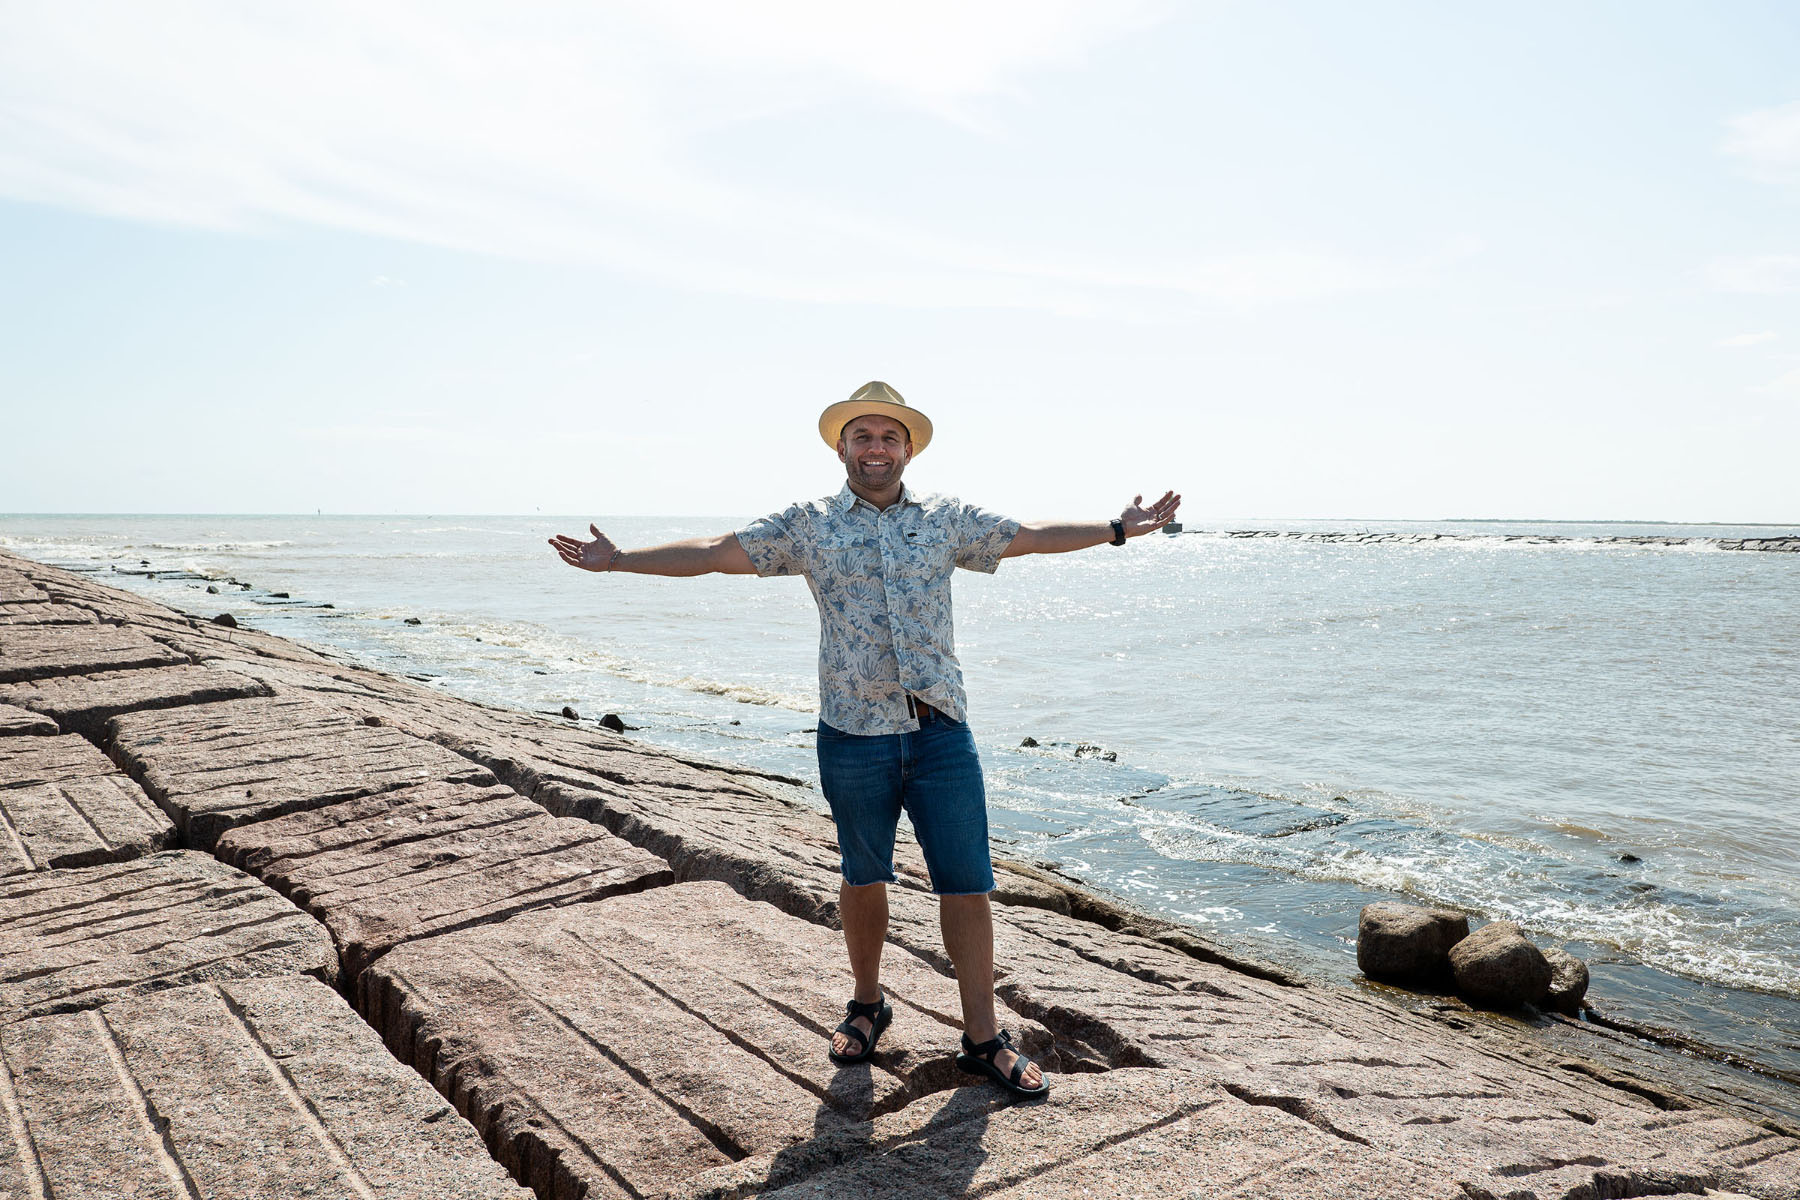 Chet Garner stands in front of the Gulf of Mexico in a small sombrero and floral shirt